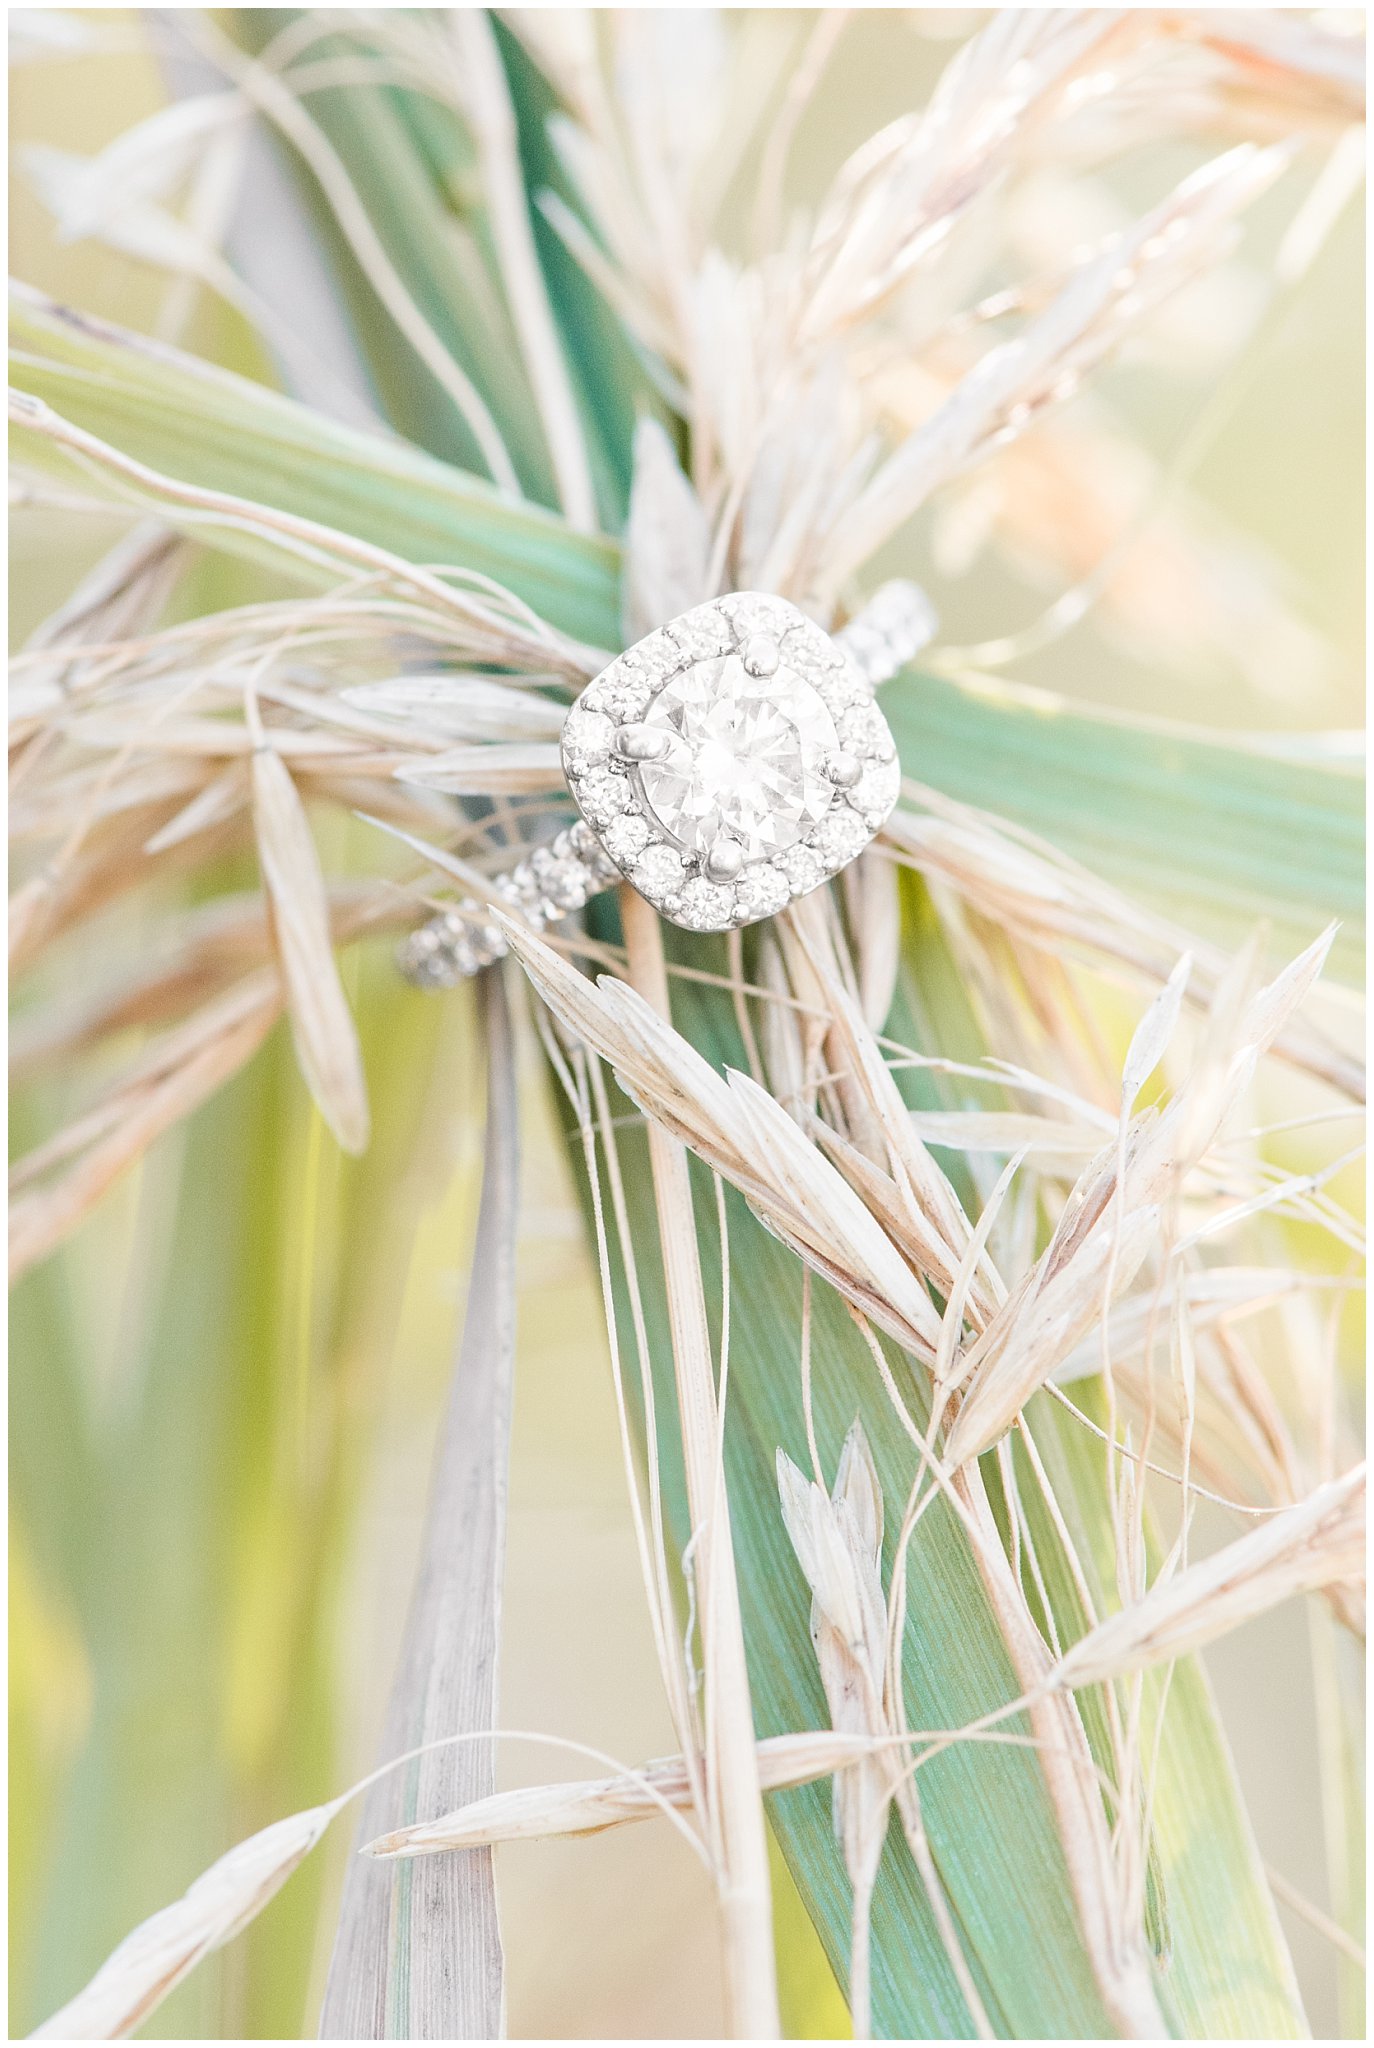 Engagement ring on fall grass and wheat grass | A Classic Snowbasin Fall Engagement Session | Jessie and Dallin Photography